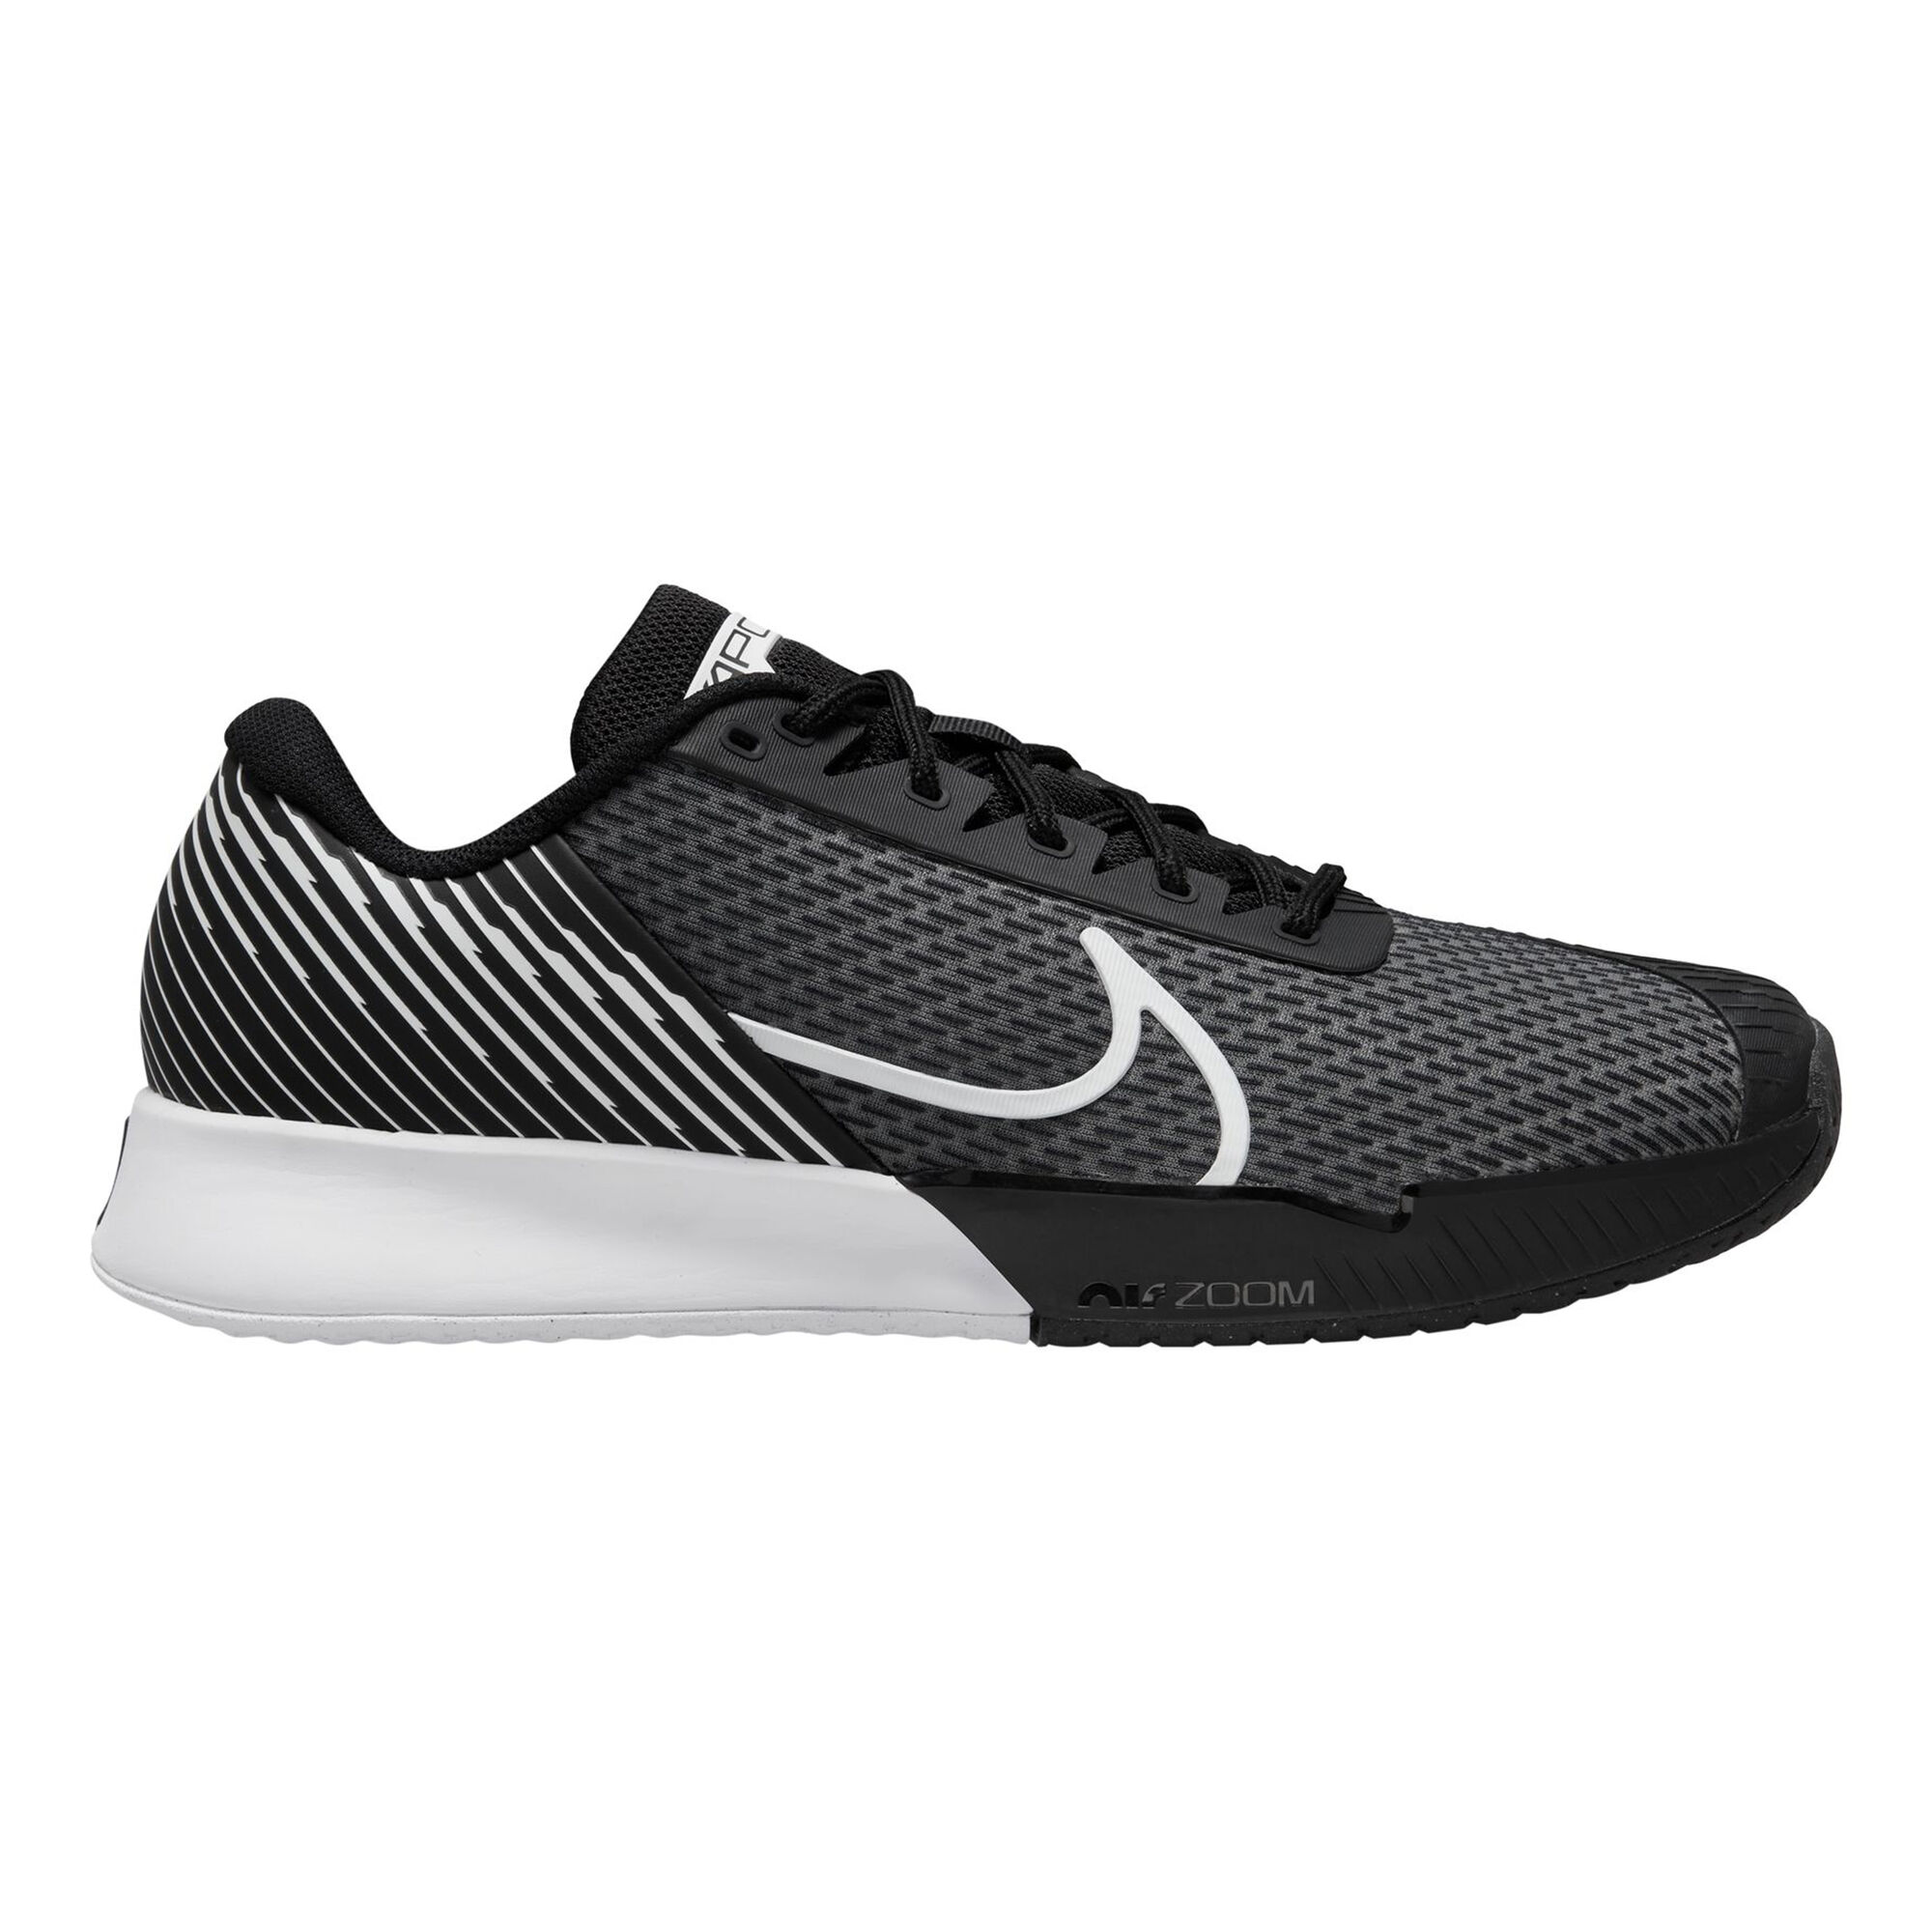 Buy Nike Air Zoom Vapor Pro 2 Chaussures Toutes Surfaces Hommes